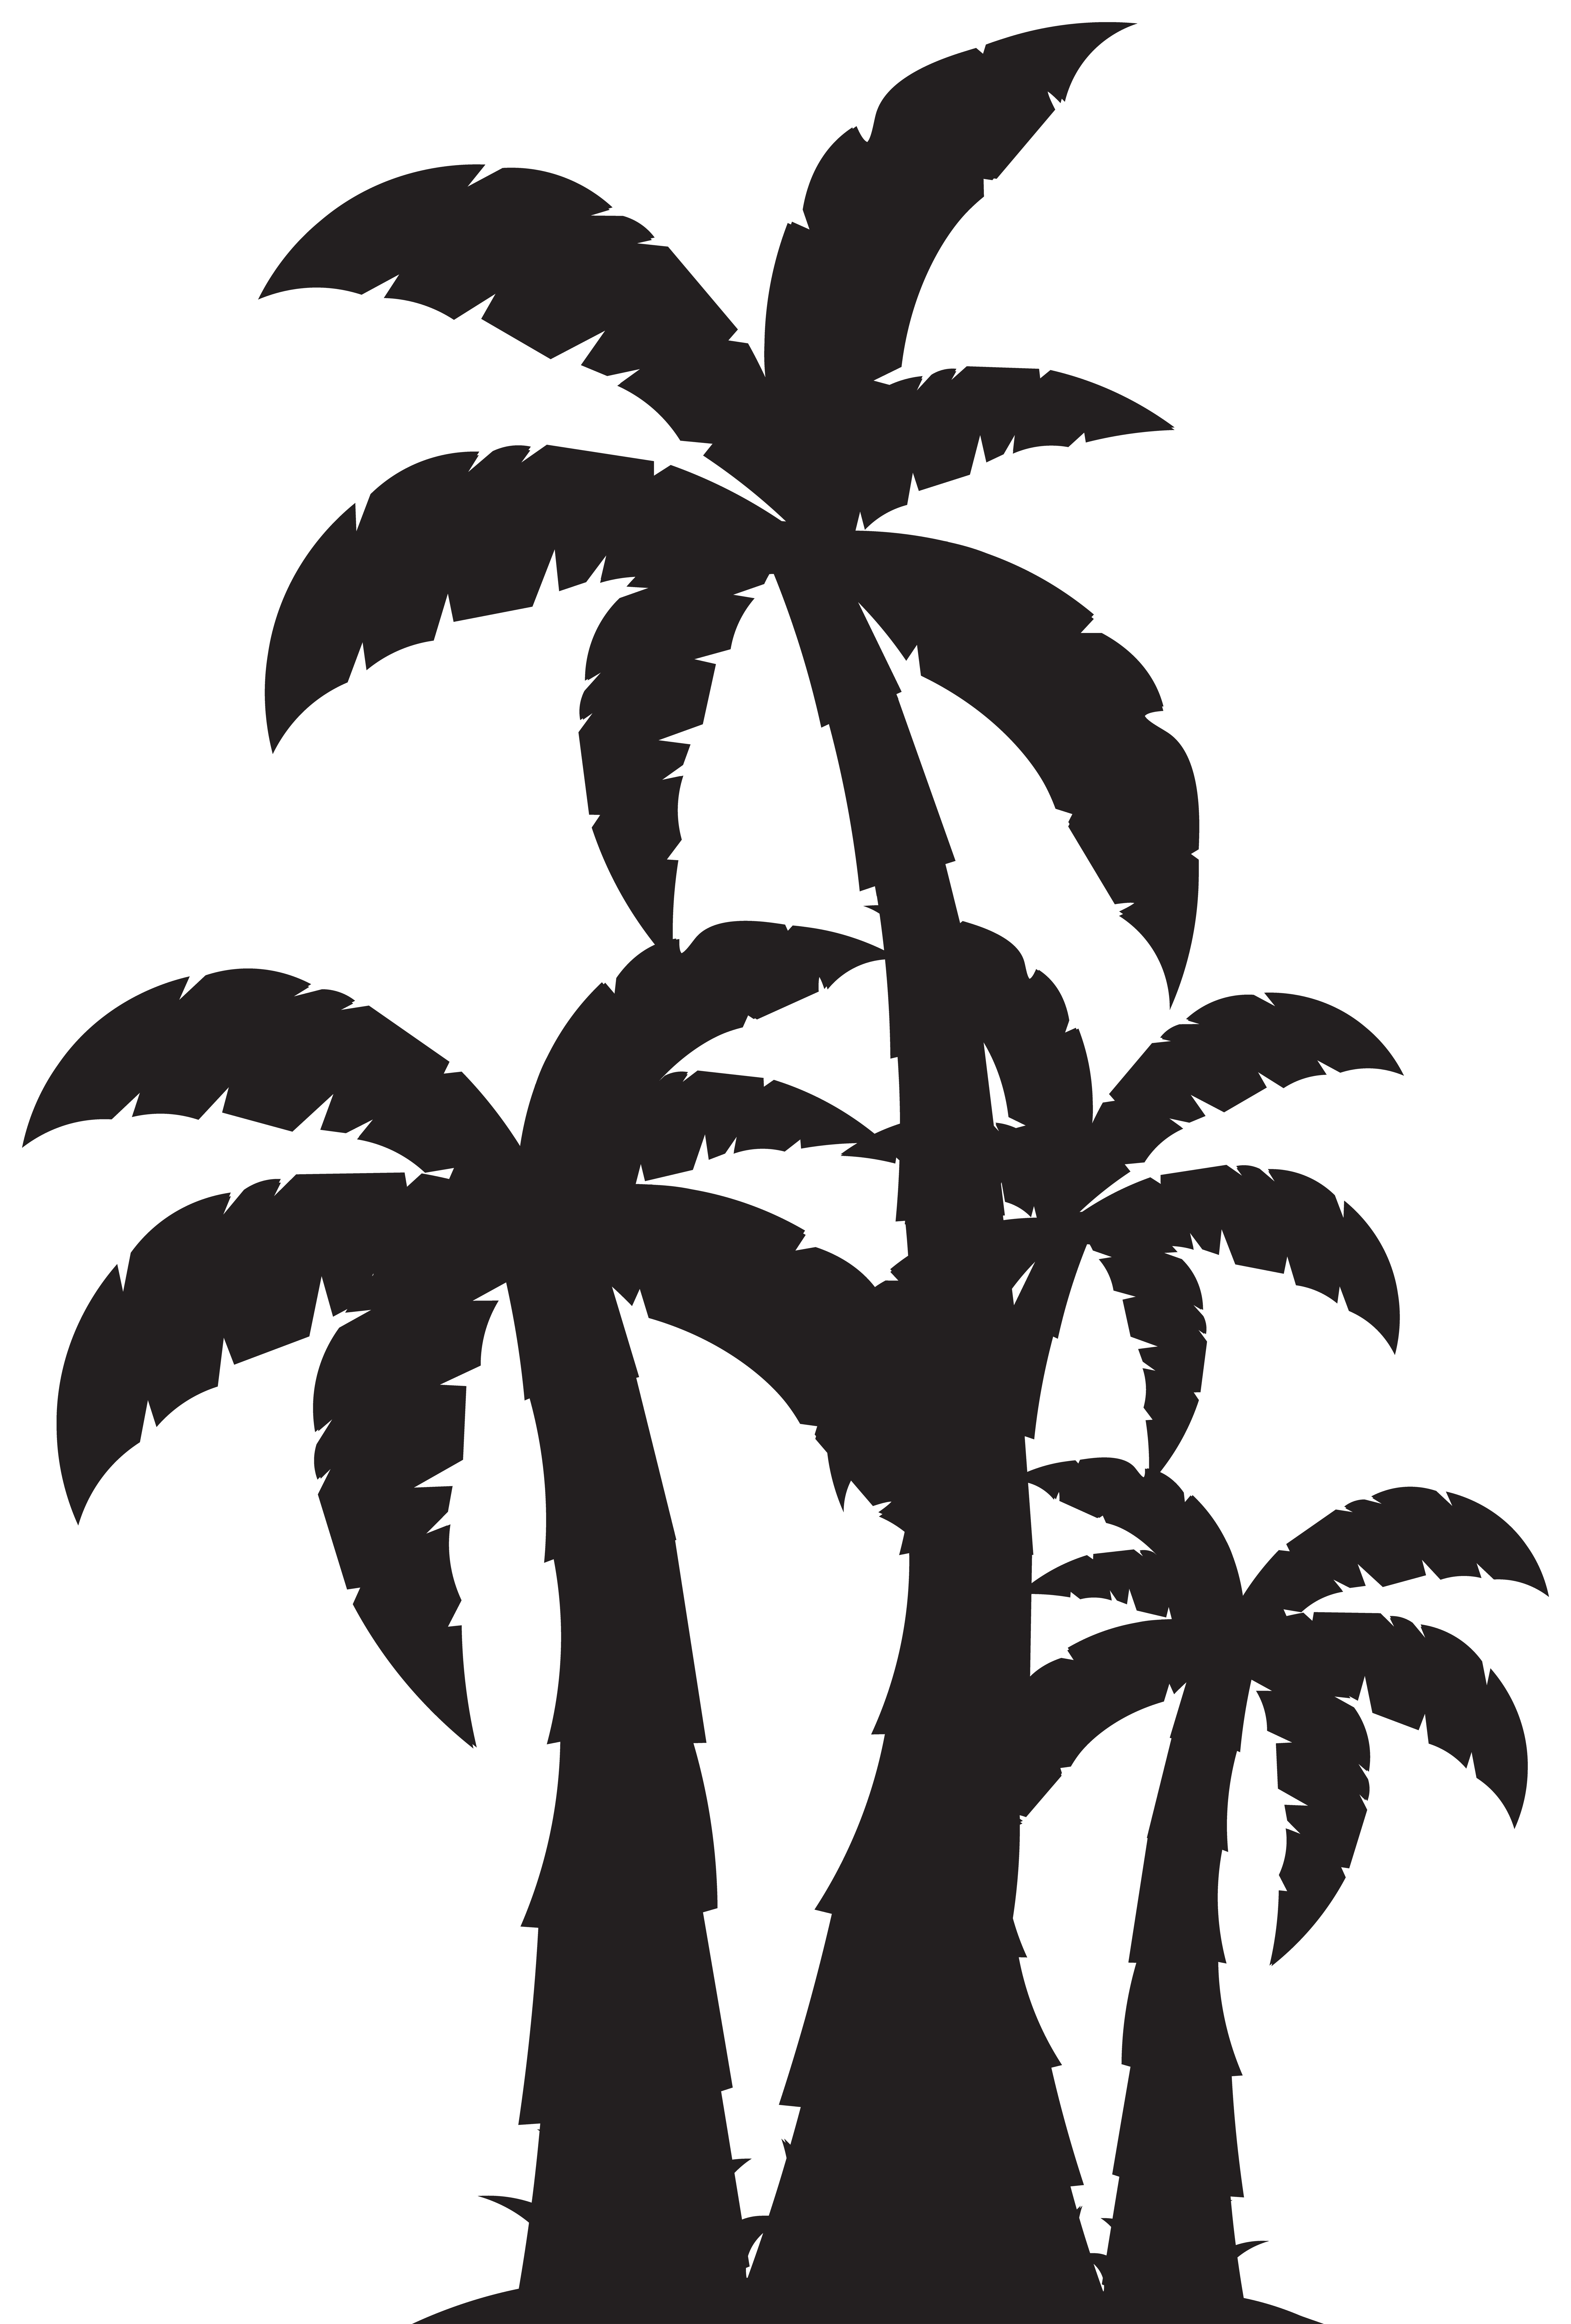 silhouette clipart palm tree